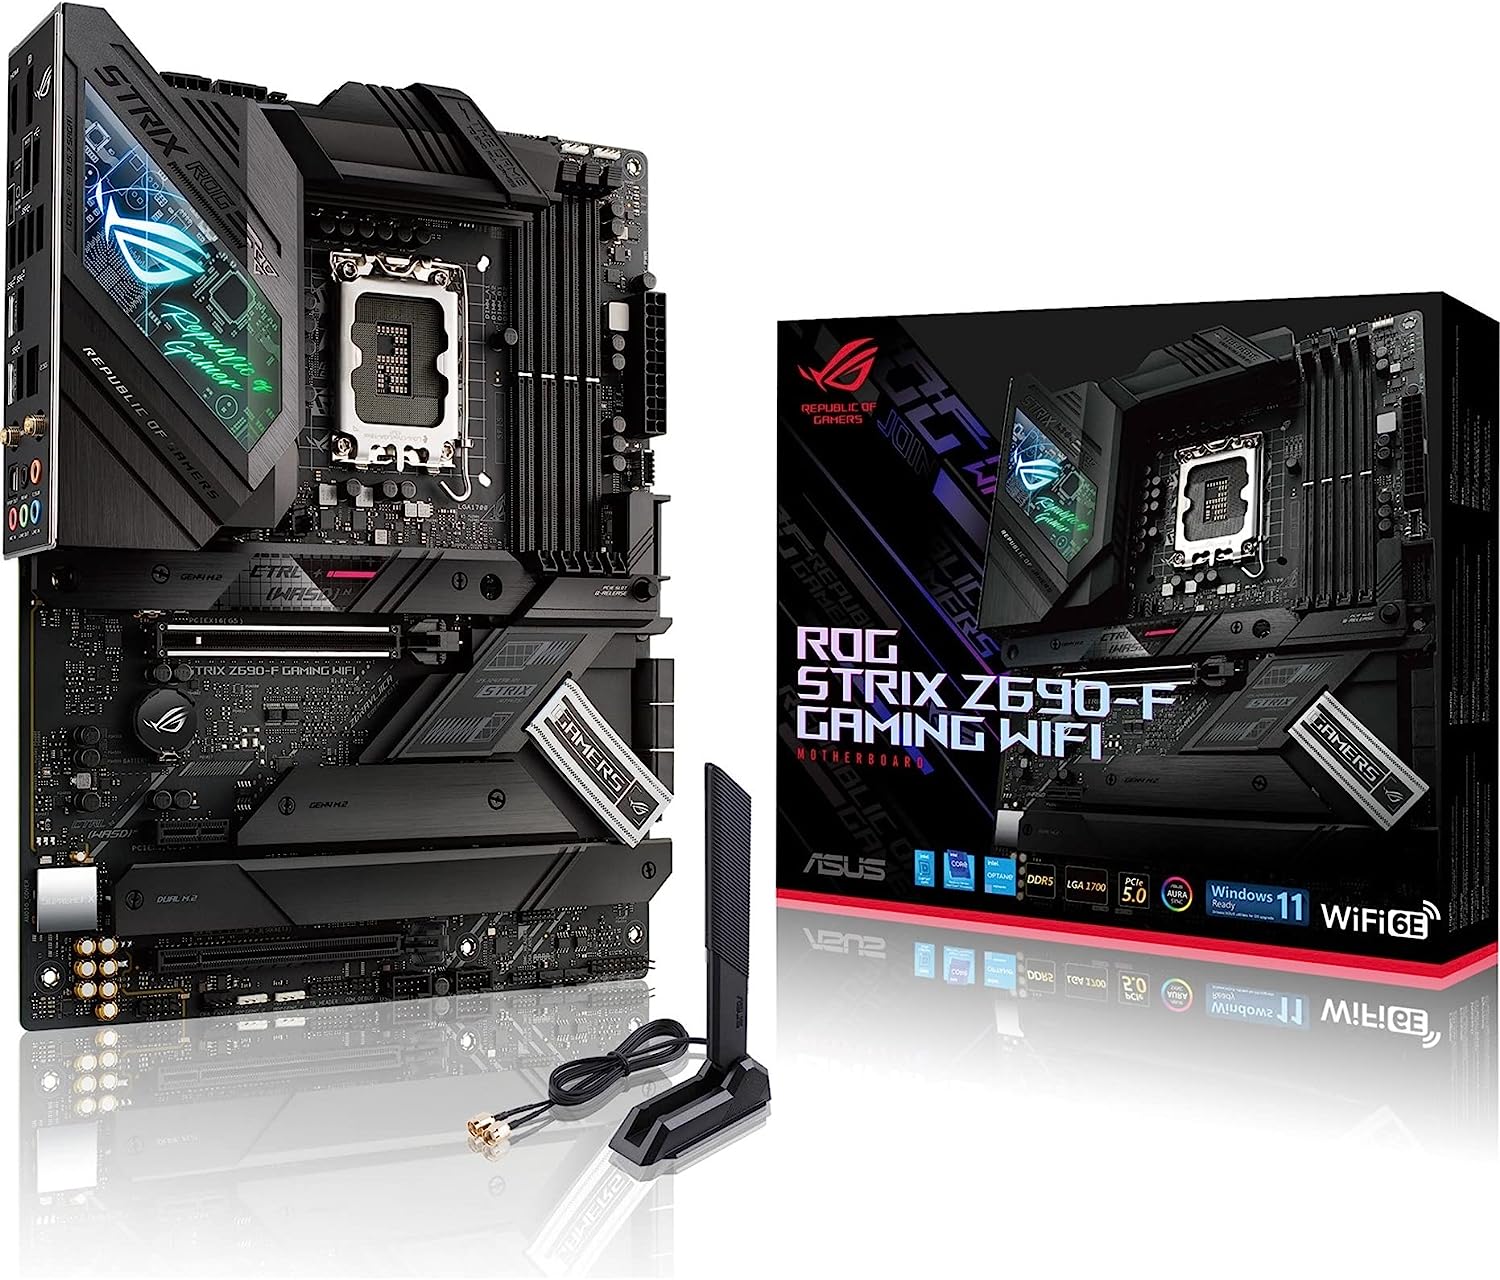 ASUS ROG Strix Z690-F Gaming Motherboard Is on Sale for Almost $80 Off Ahead of Father's Day